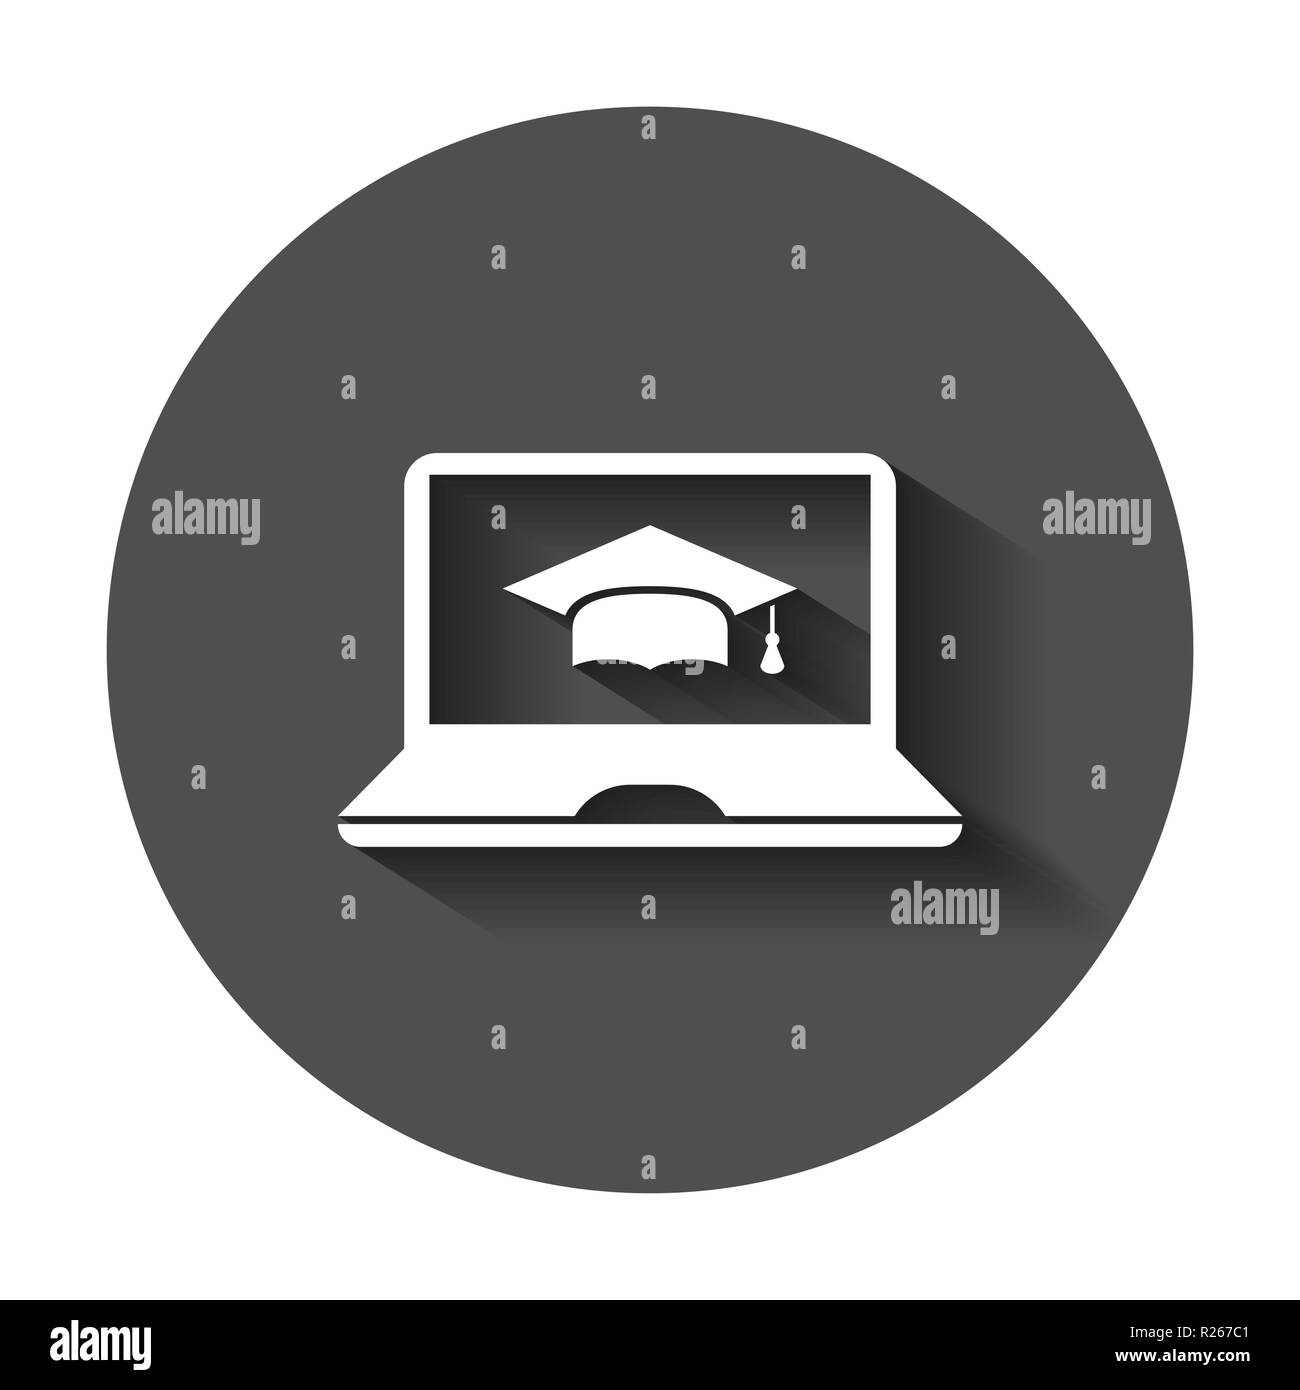 Elearning education icon in flat style. Study vector illustration with long shadow. Laptop computer online training business concept. Stock Vector